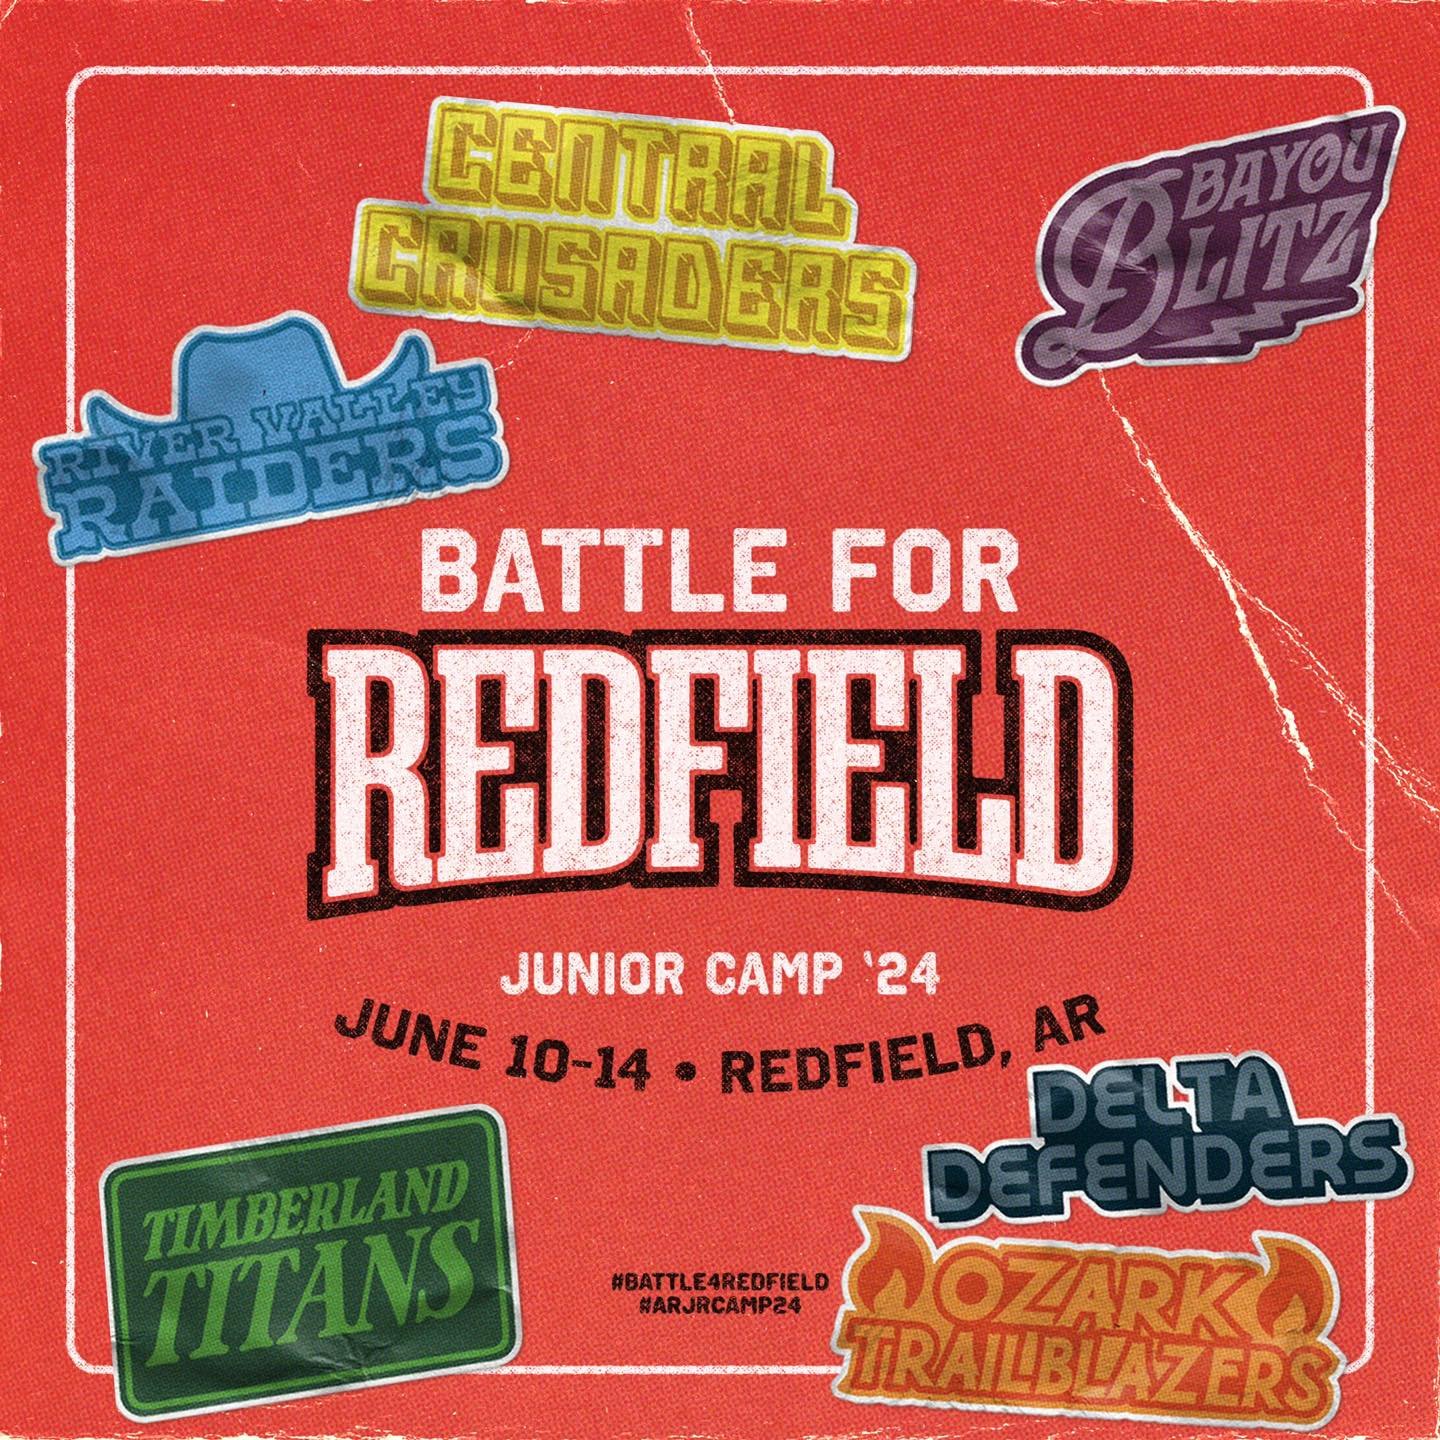 ❗️BATTLE FOR REDFIELD❗️

JR. CAMP | AGES 12- 14 | JUNE 10-13

We can&rsquo;t wait to see you this summer in Redfield! We believe God is going to do amazing things in the lives of Arkansas Youth Junior Highers! 🙌🏼

also&hellip;..TEAM GAMES ARE ABOUT